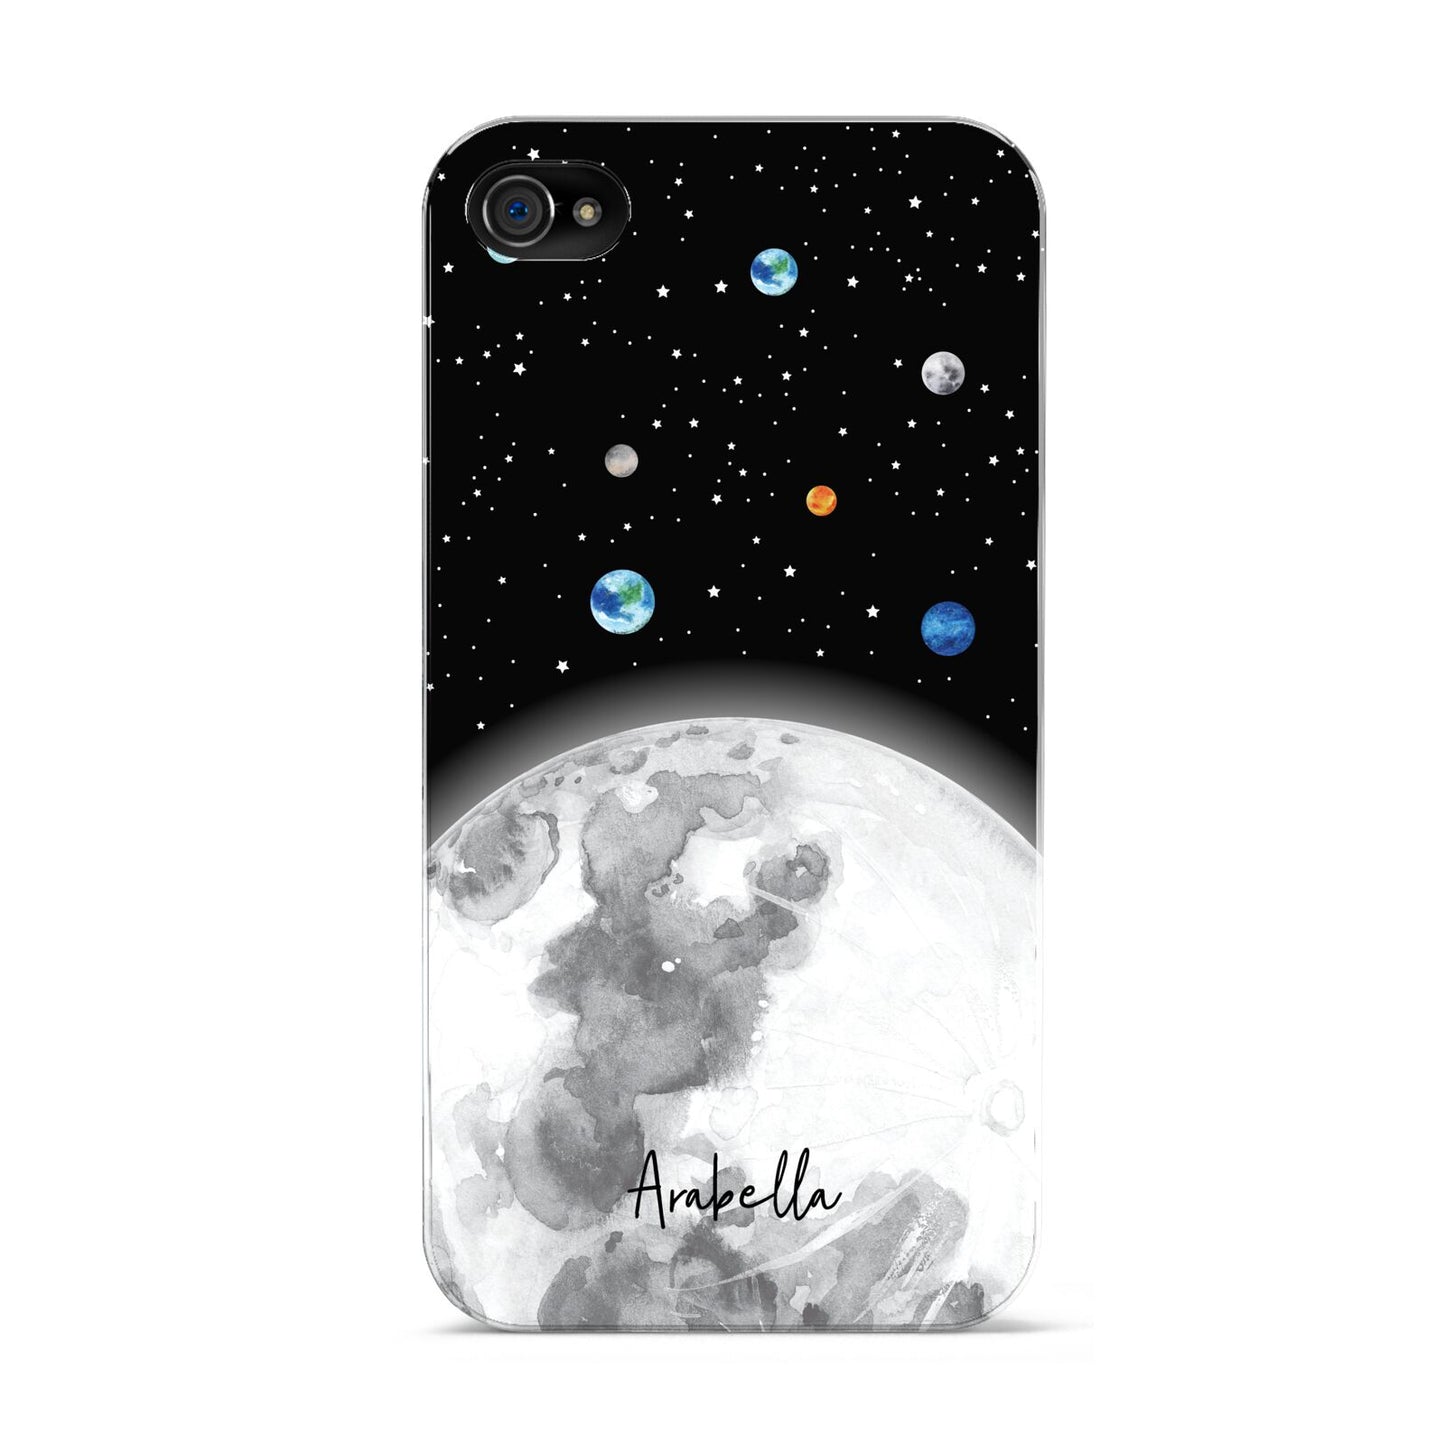 Watercolour Close up Moon with Name Apple iPhone 4s Case